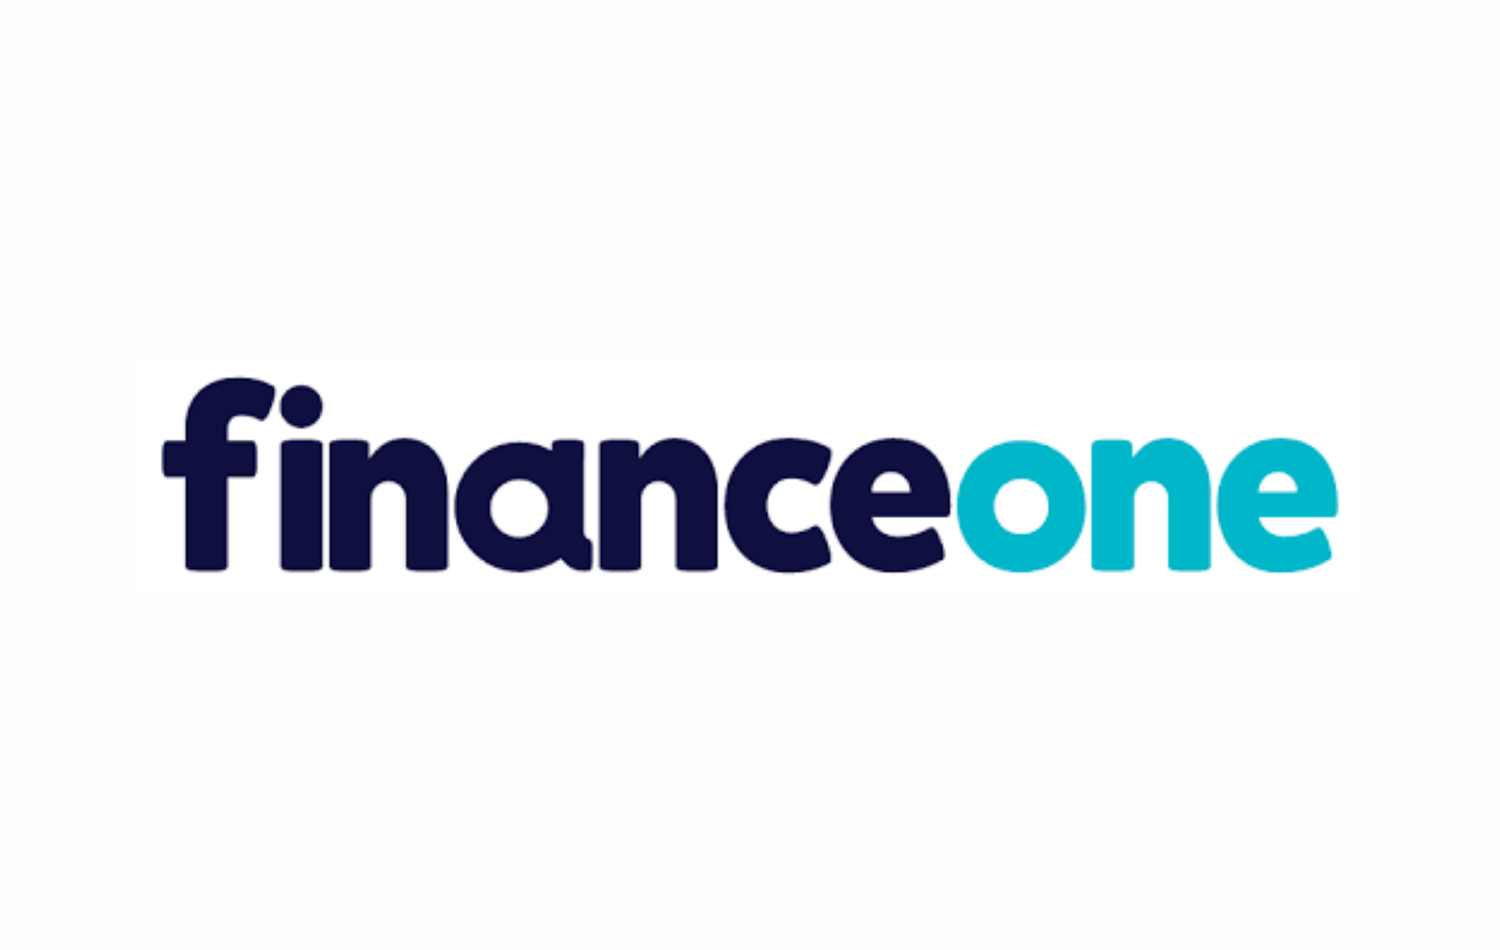 Finance One - Make Financial Progress At Your Own Pace